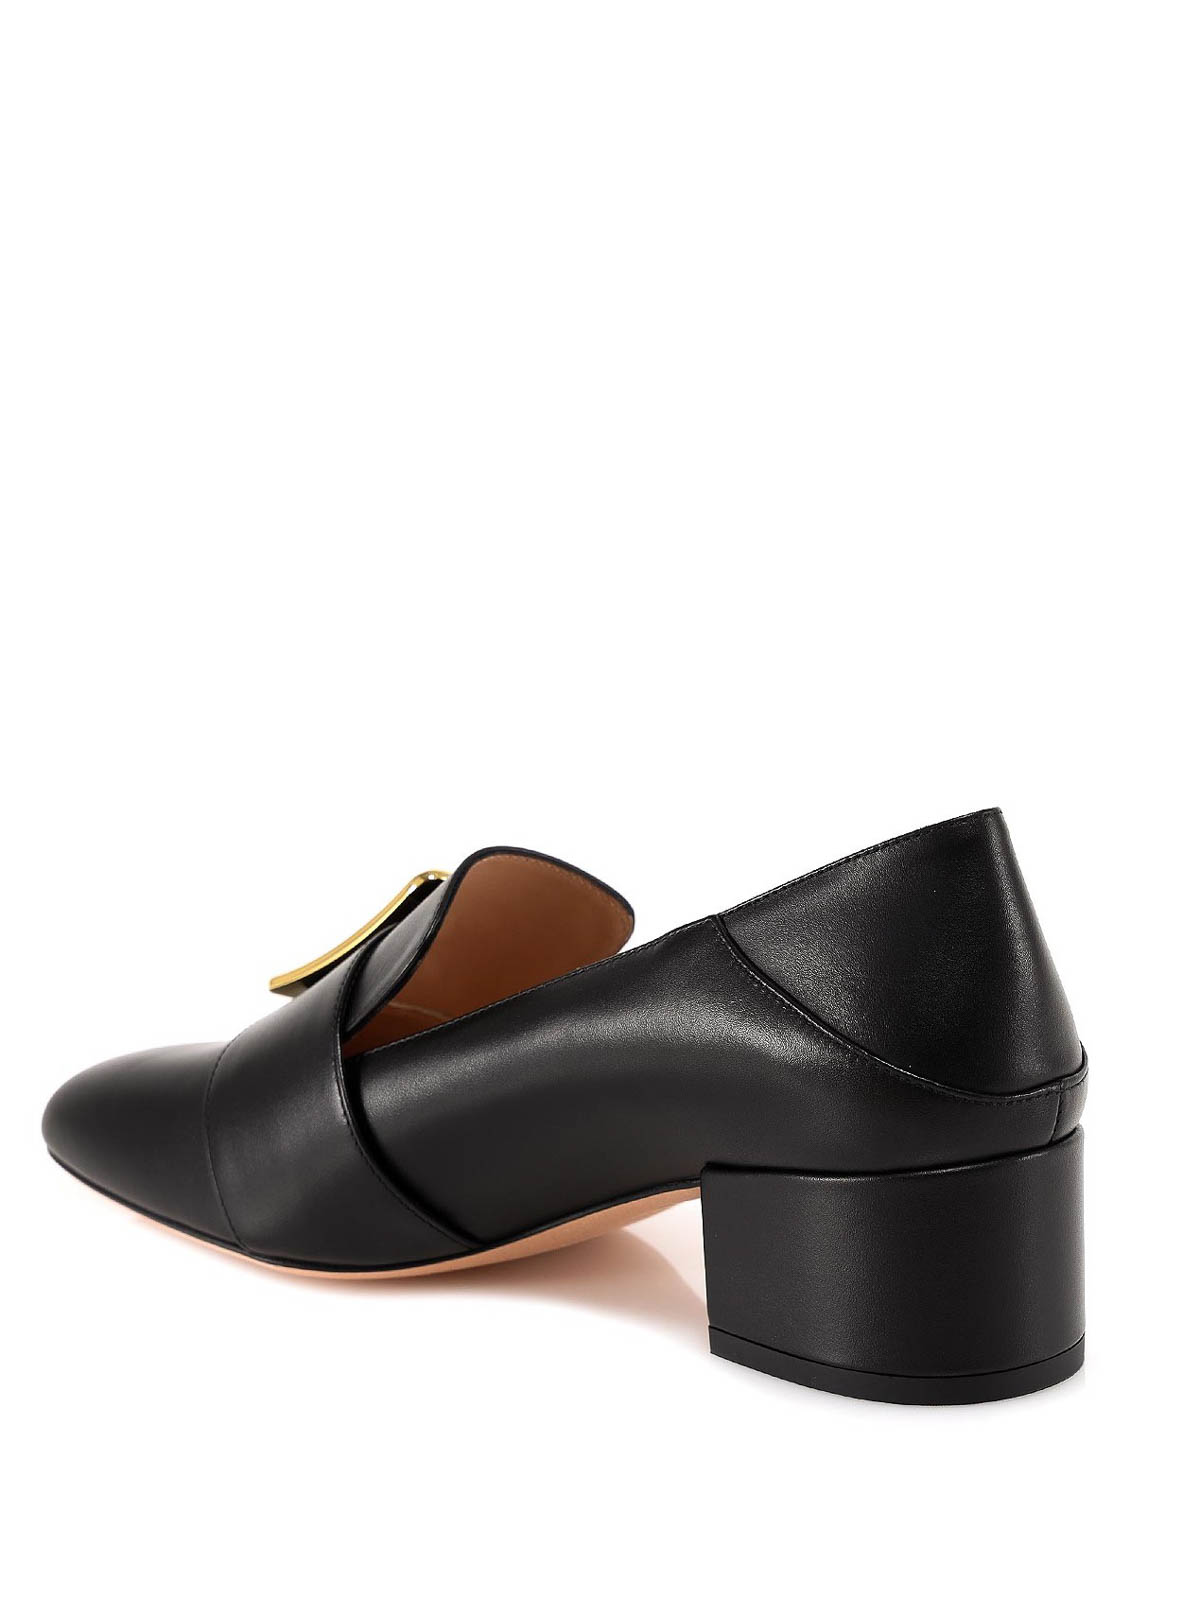 Court shoes Bally - Janelle pumps - 6238157 | Shop online at THEBS